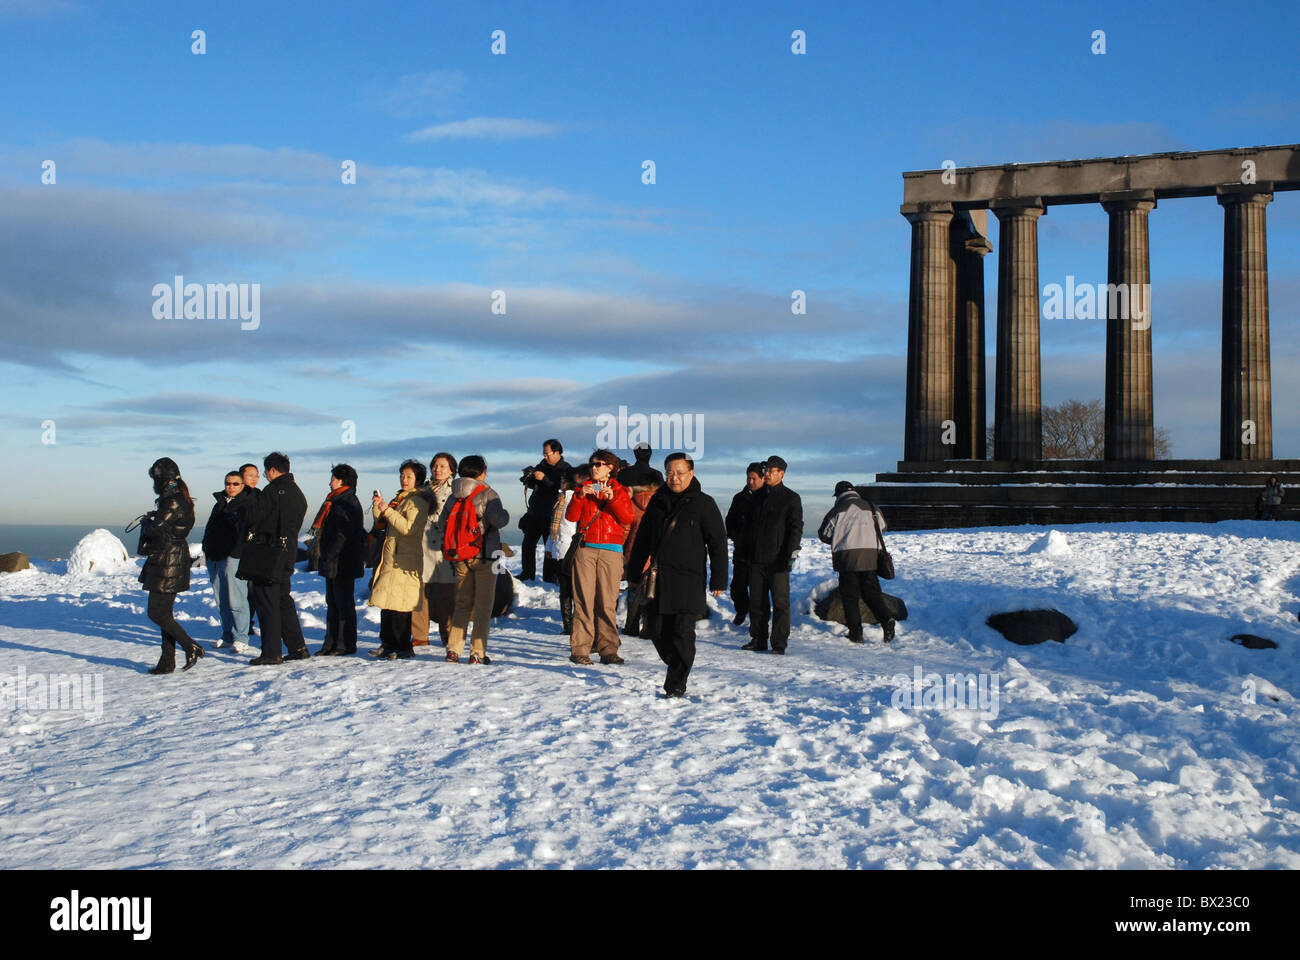 A party of  tourists taking photographs at the National Monument on Calton Hill in Edinburgh after an early December snowfall. Stock Photo